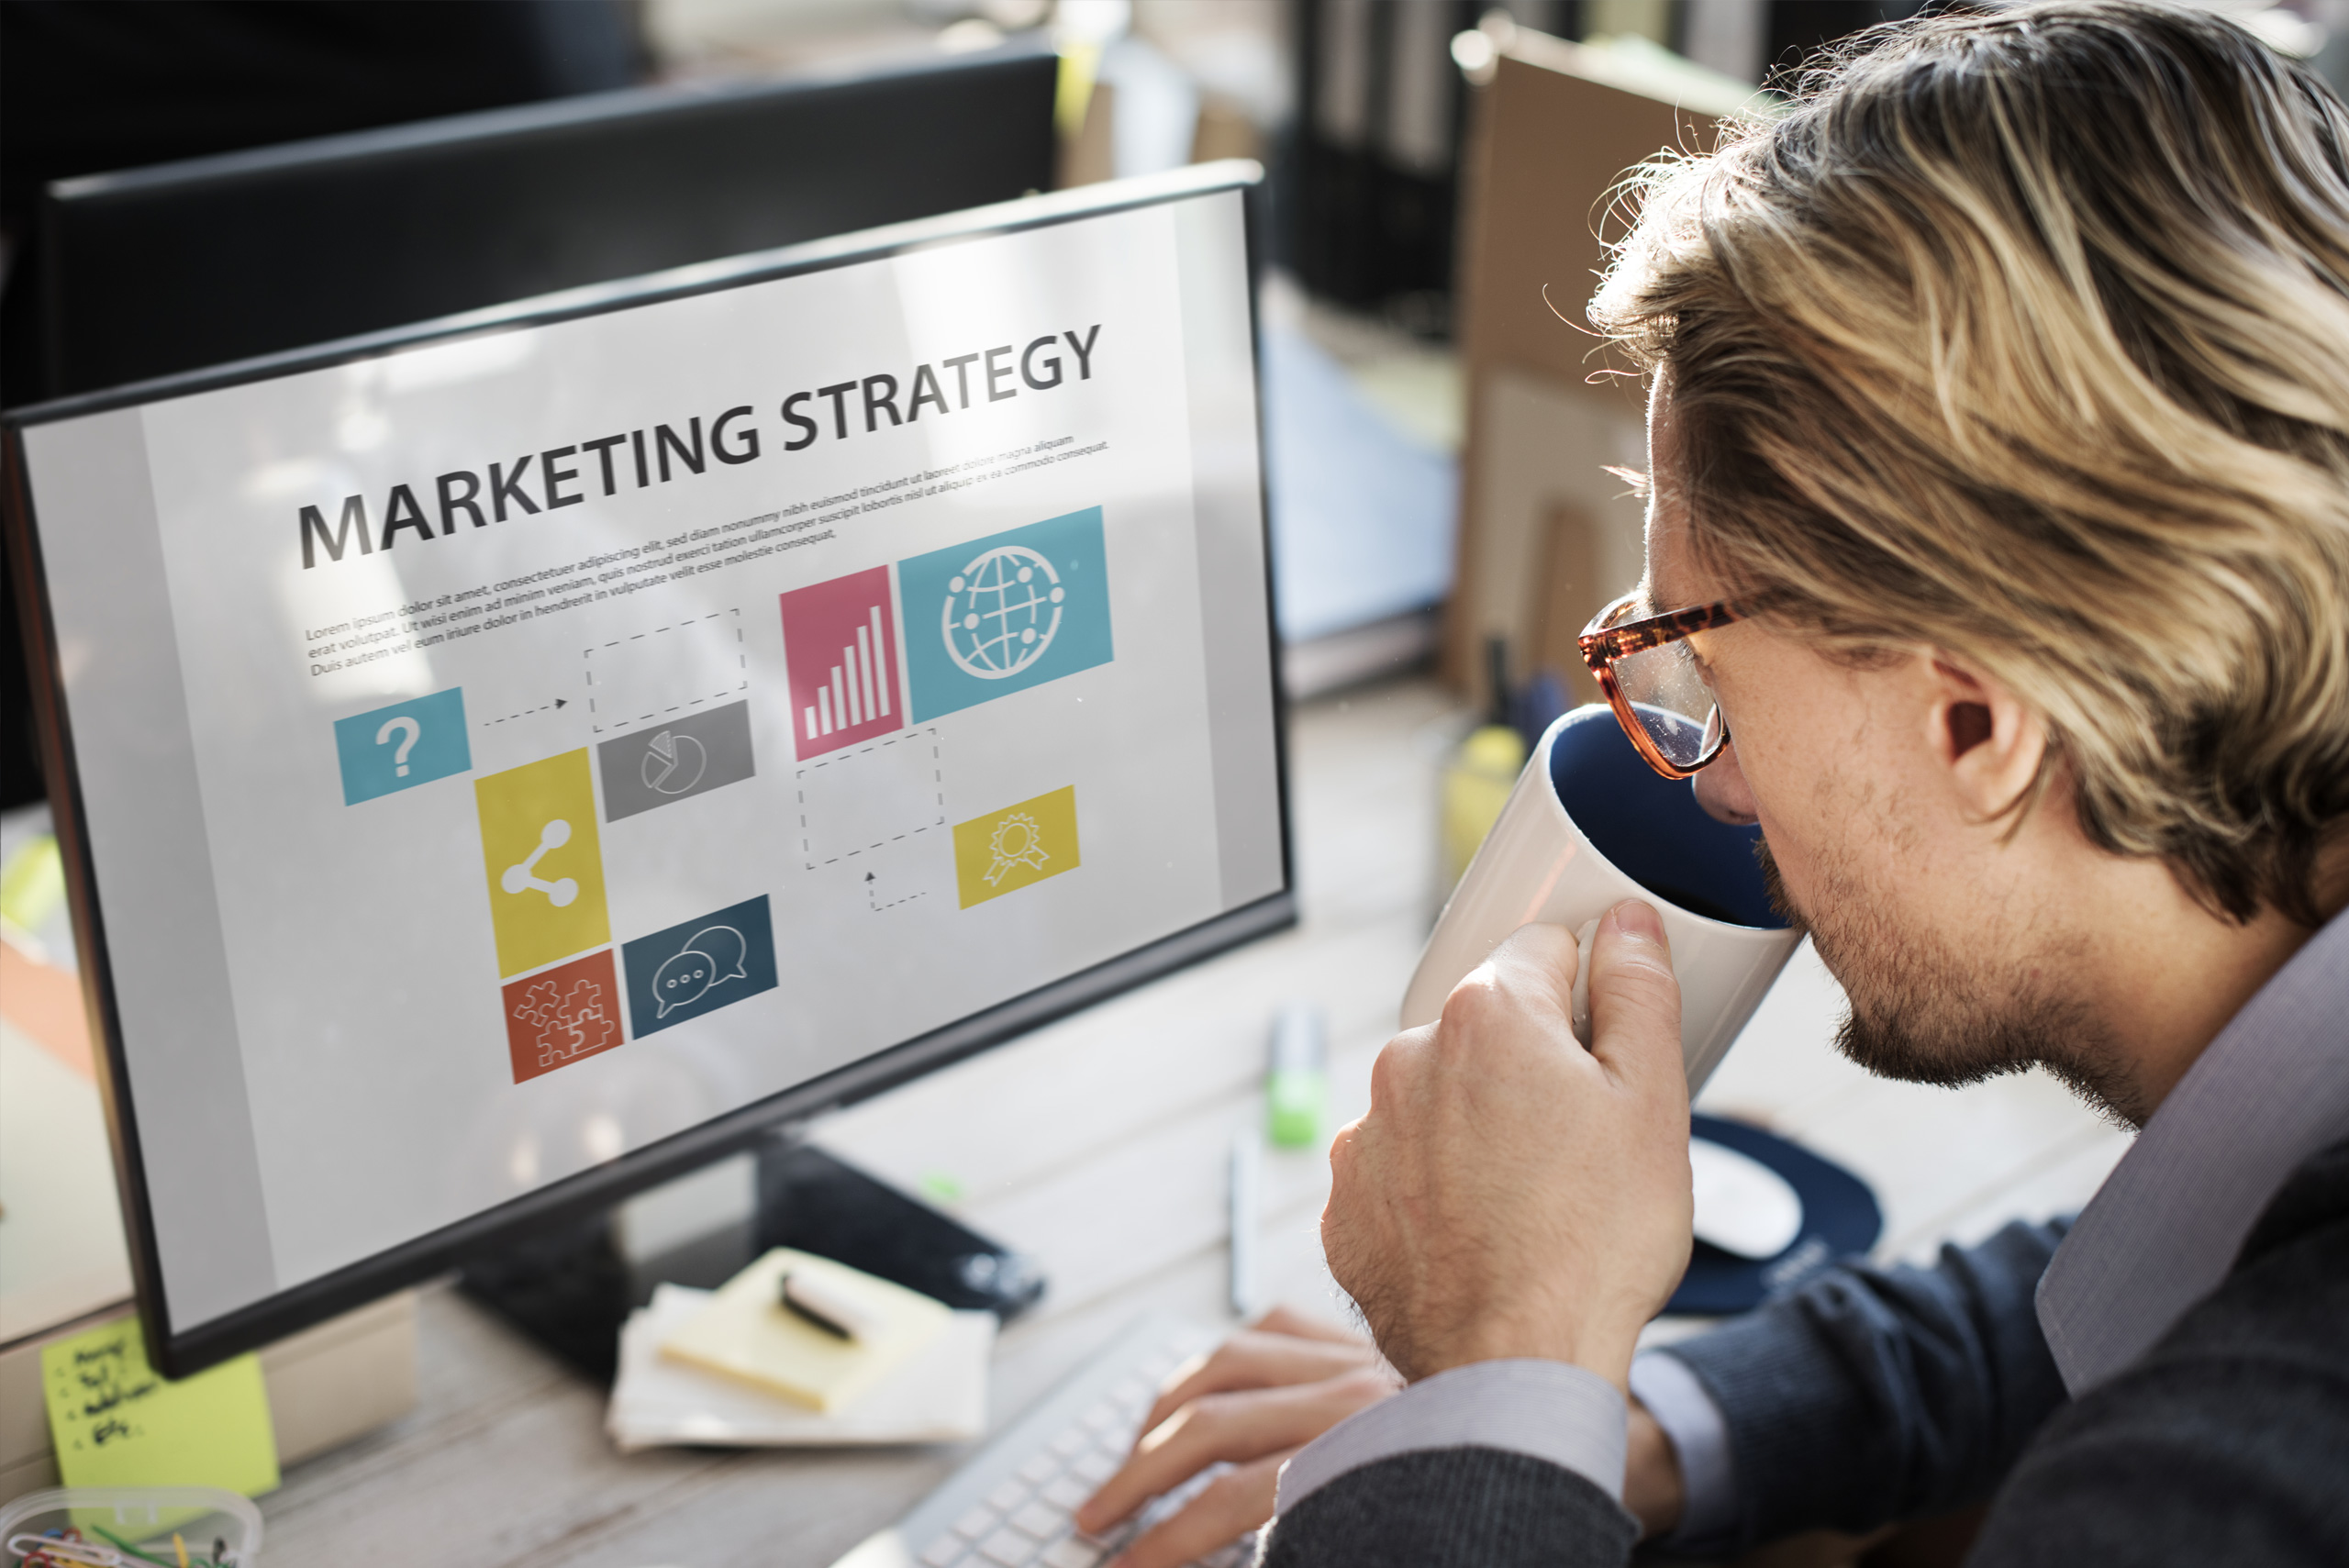 5 Surprising Marketing Tips Small Business Owners Need to Know